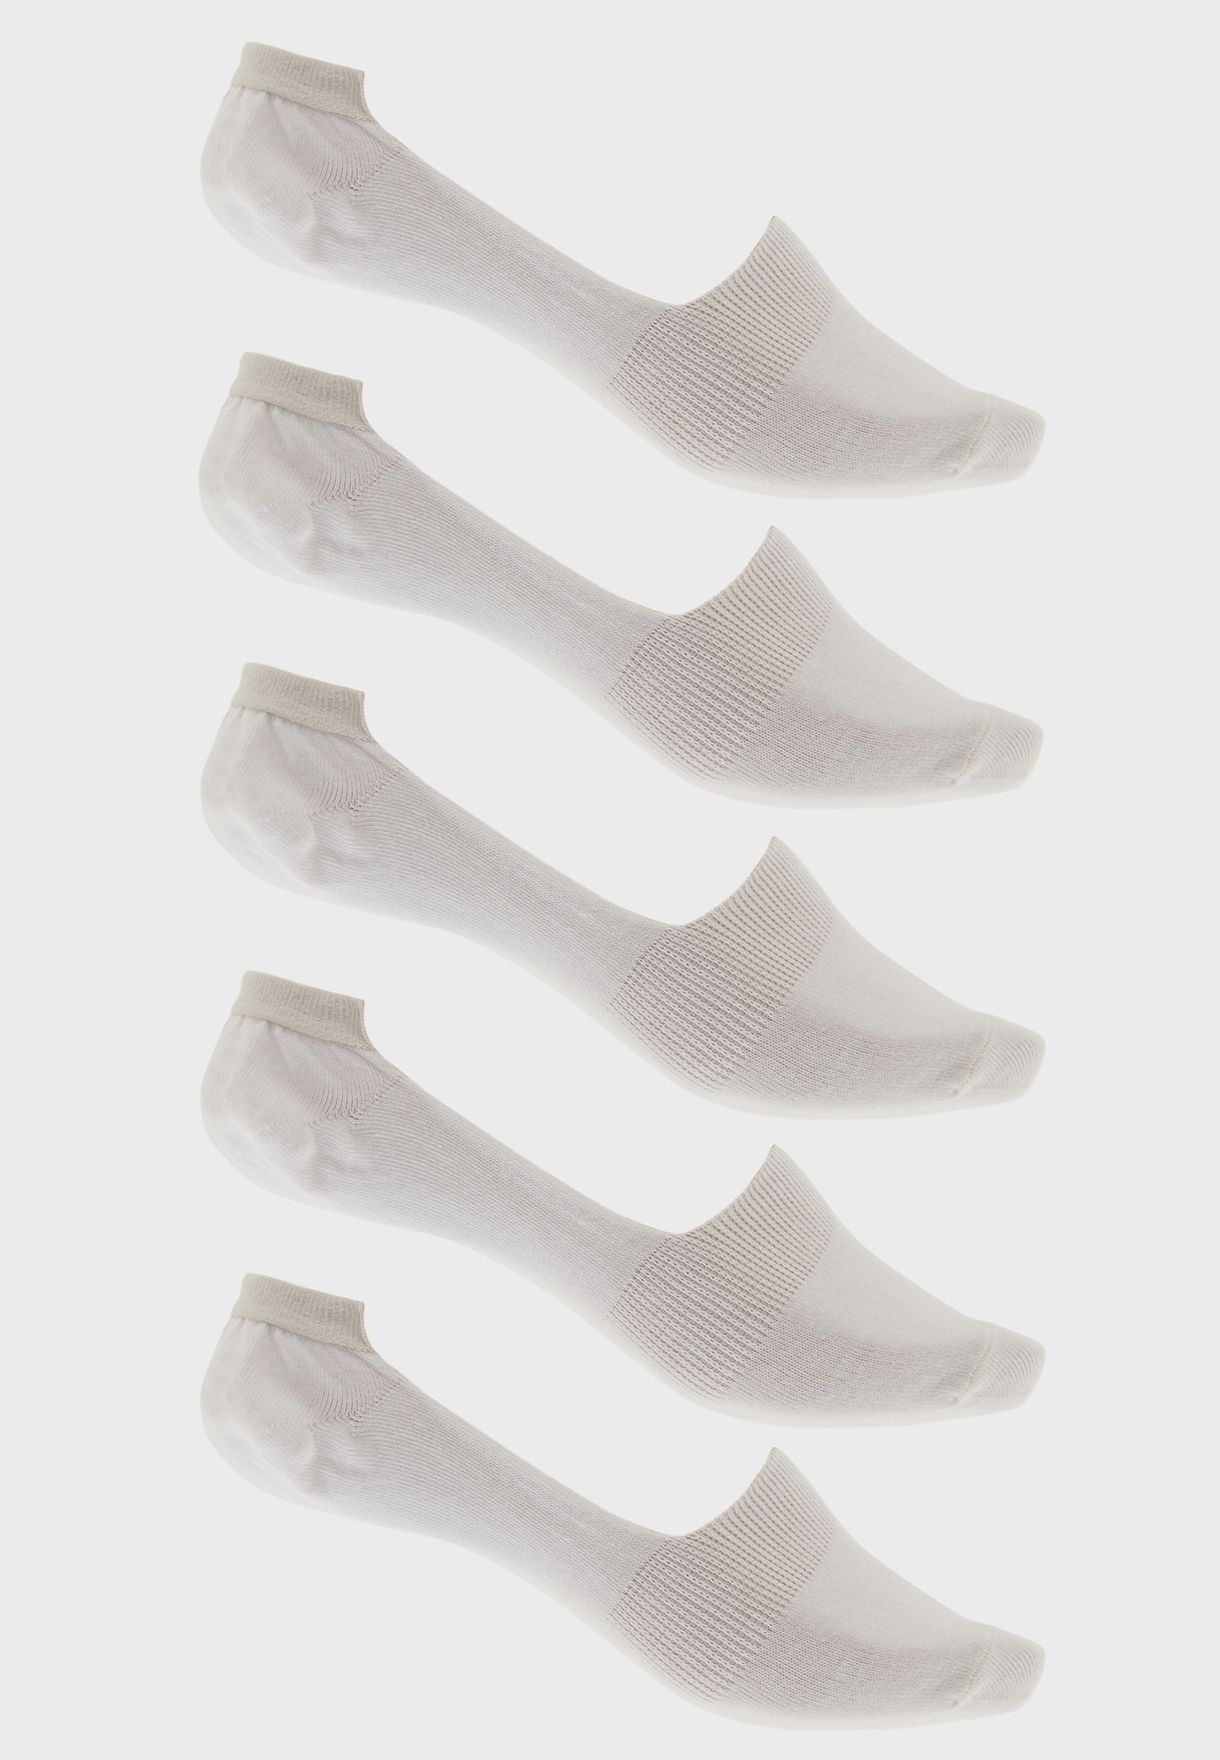 5 Pack Invisible Socks with Antibacterial Finish